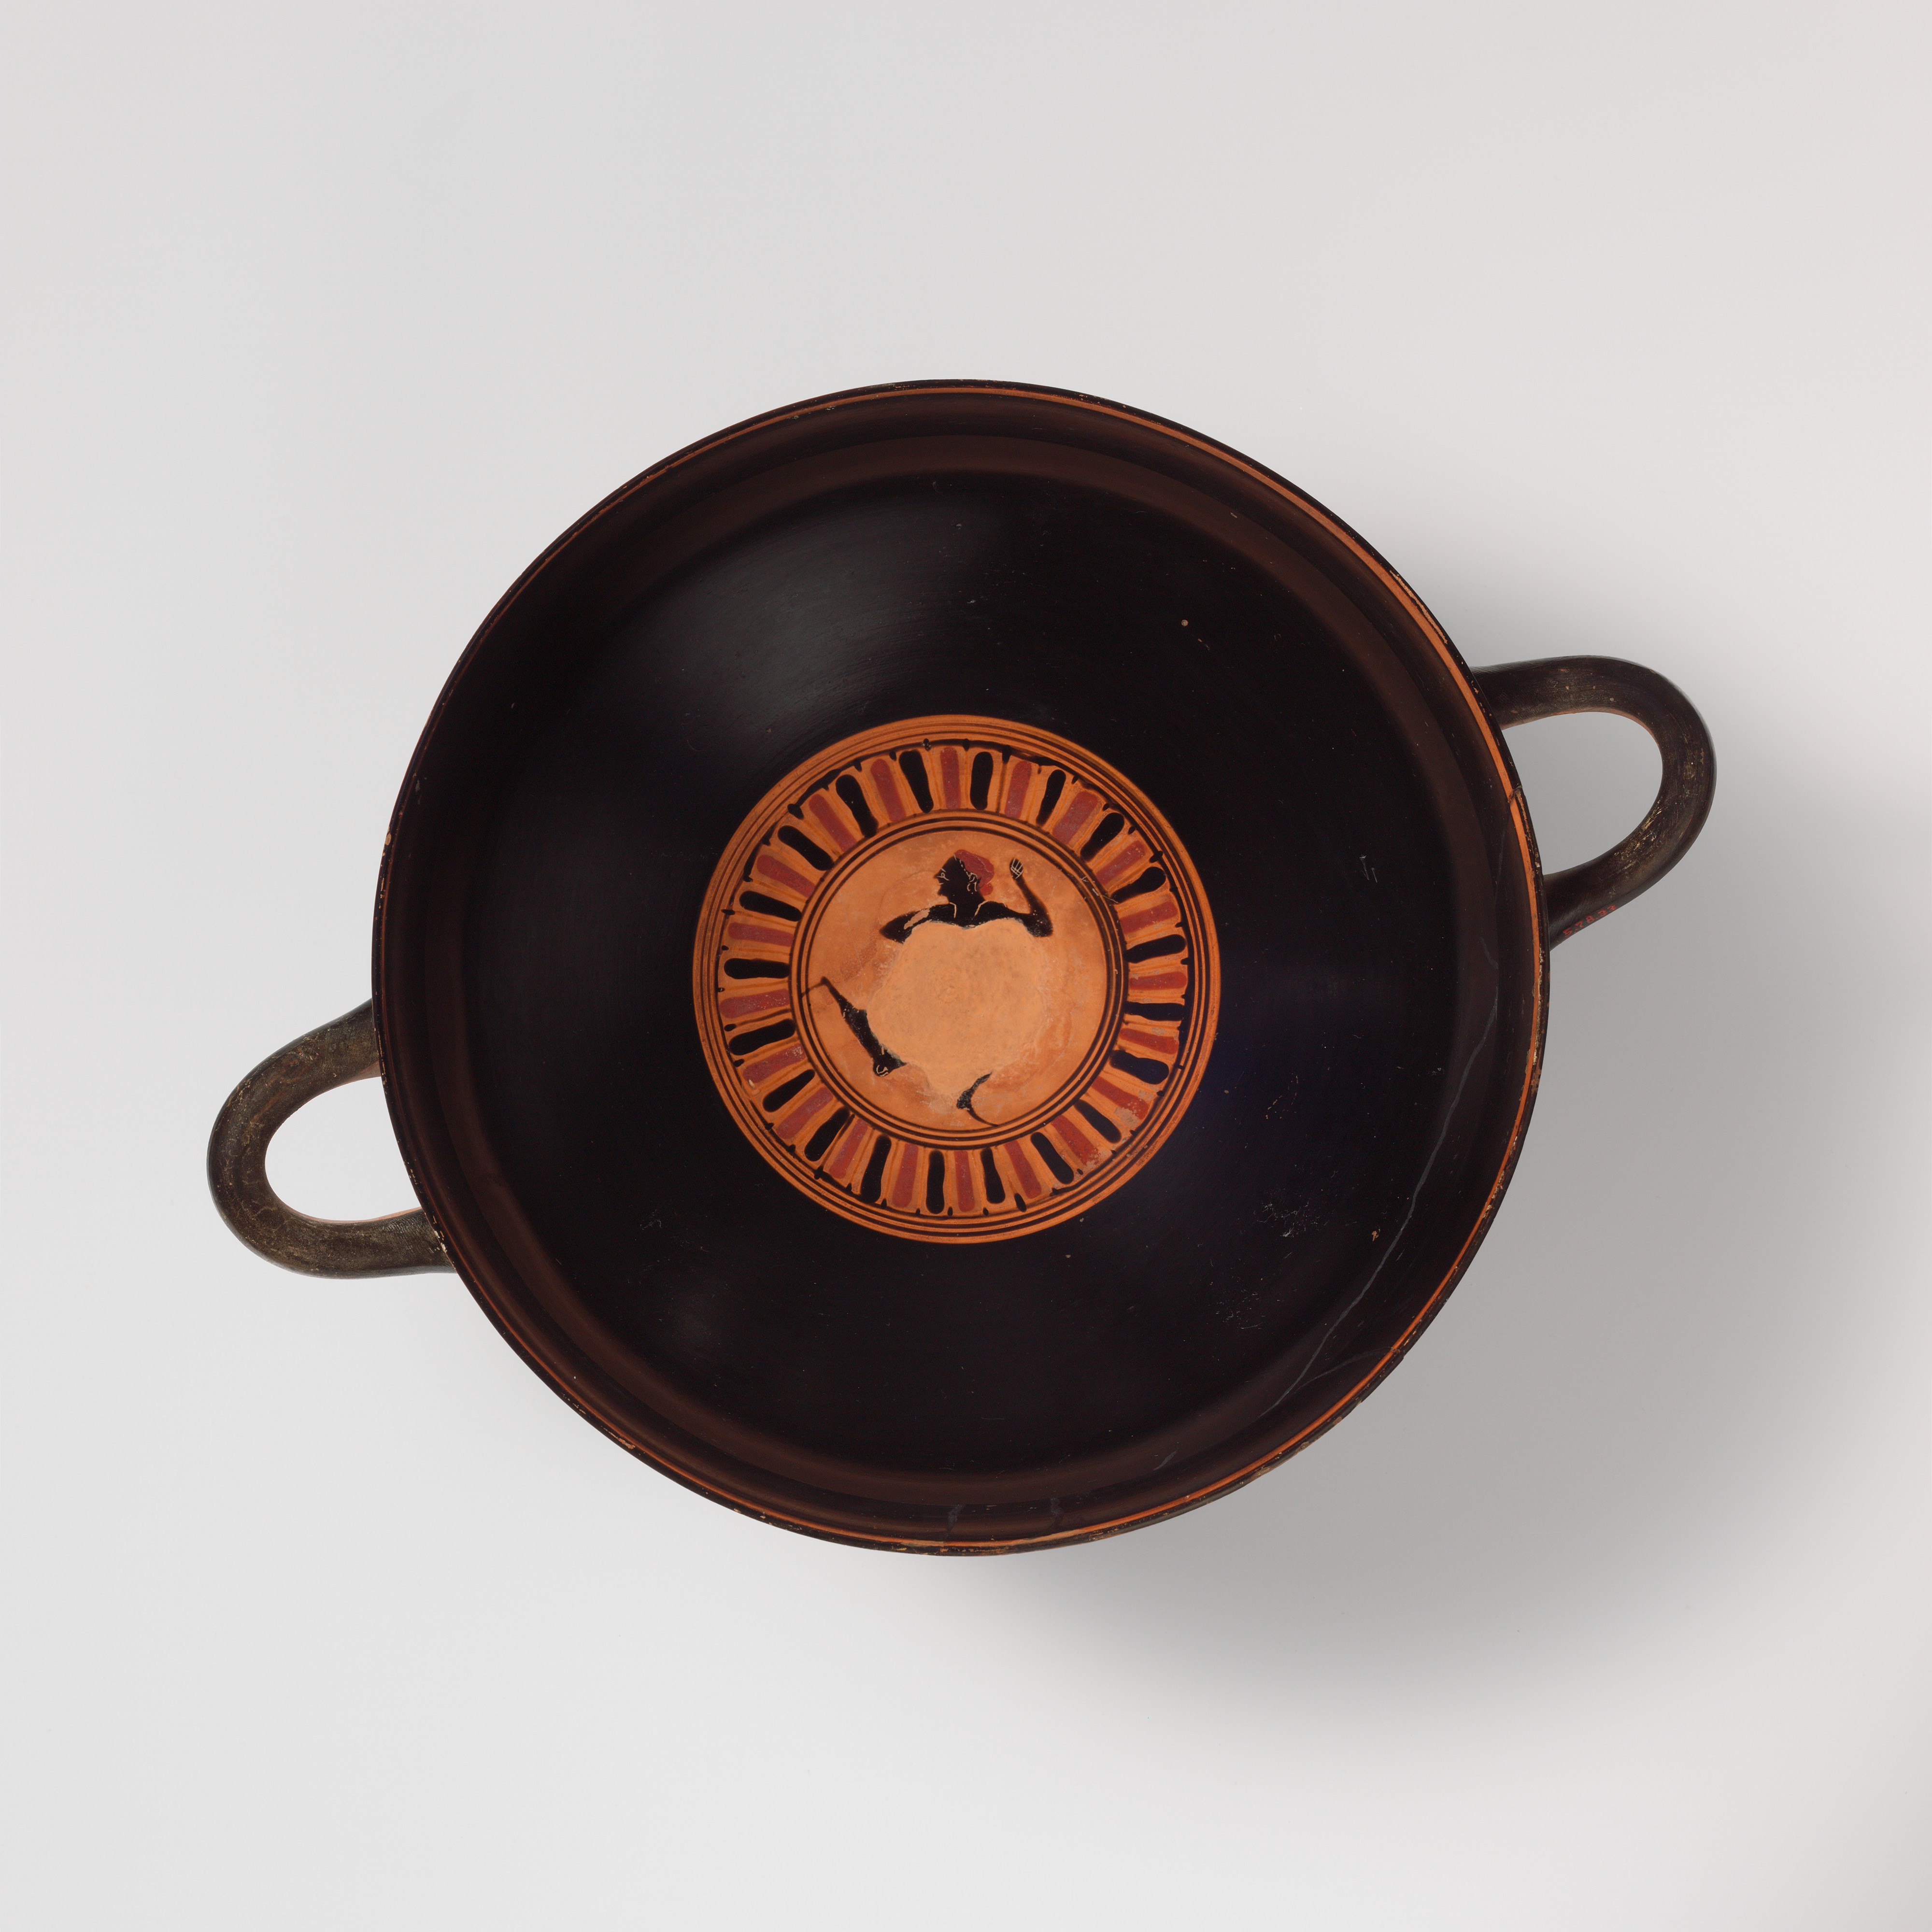 Attributed to the Museum cup) (drinking Art Archaic | Metropolitan kylix: Attic | | Siana cup | Painter Sandal Greek, of Terracotta The